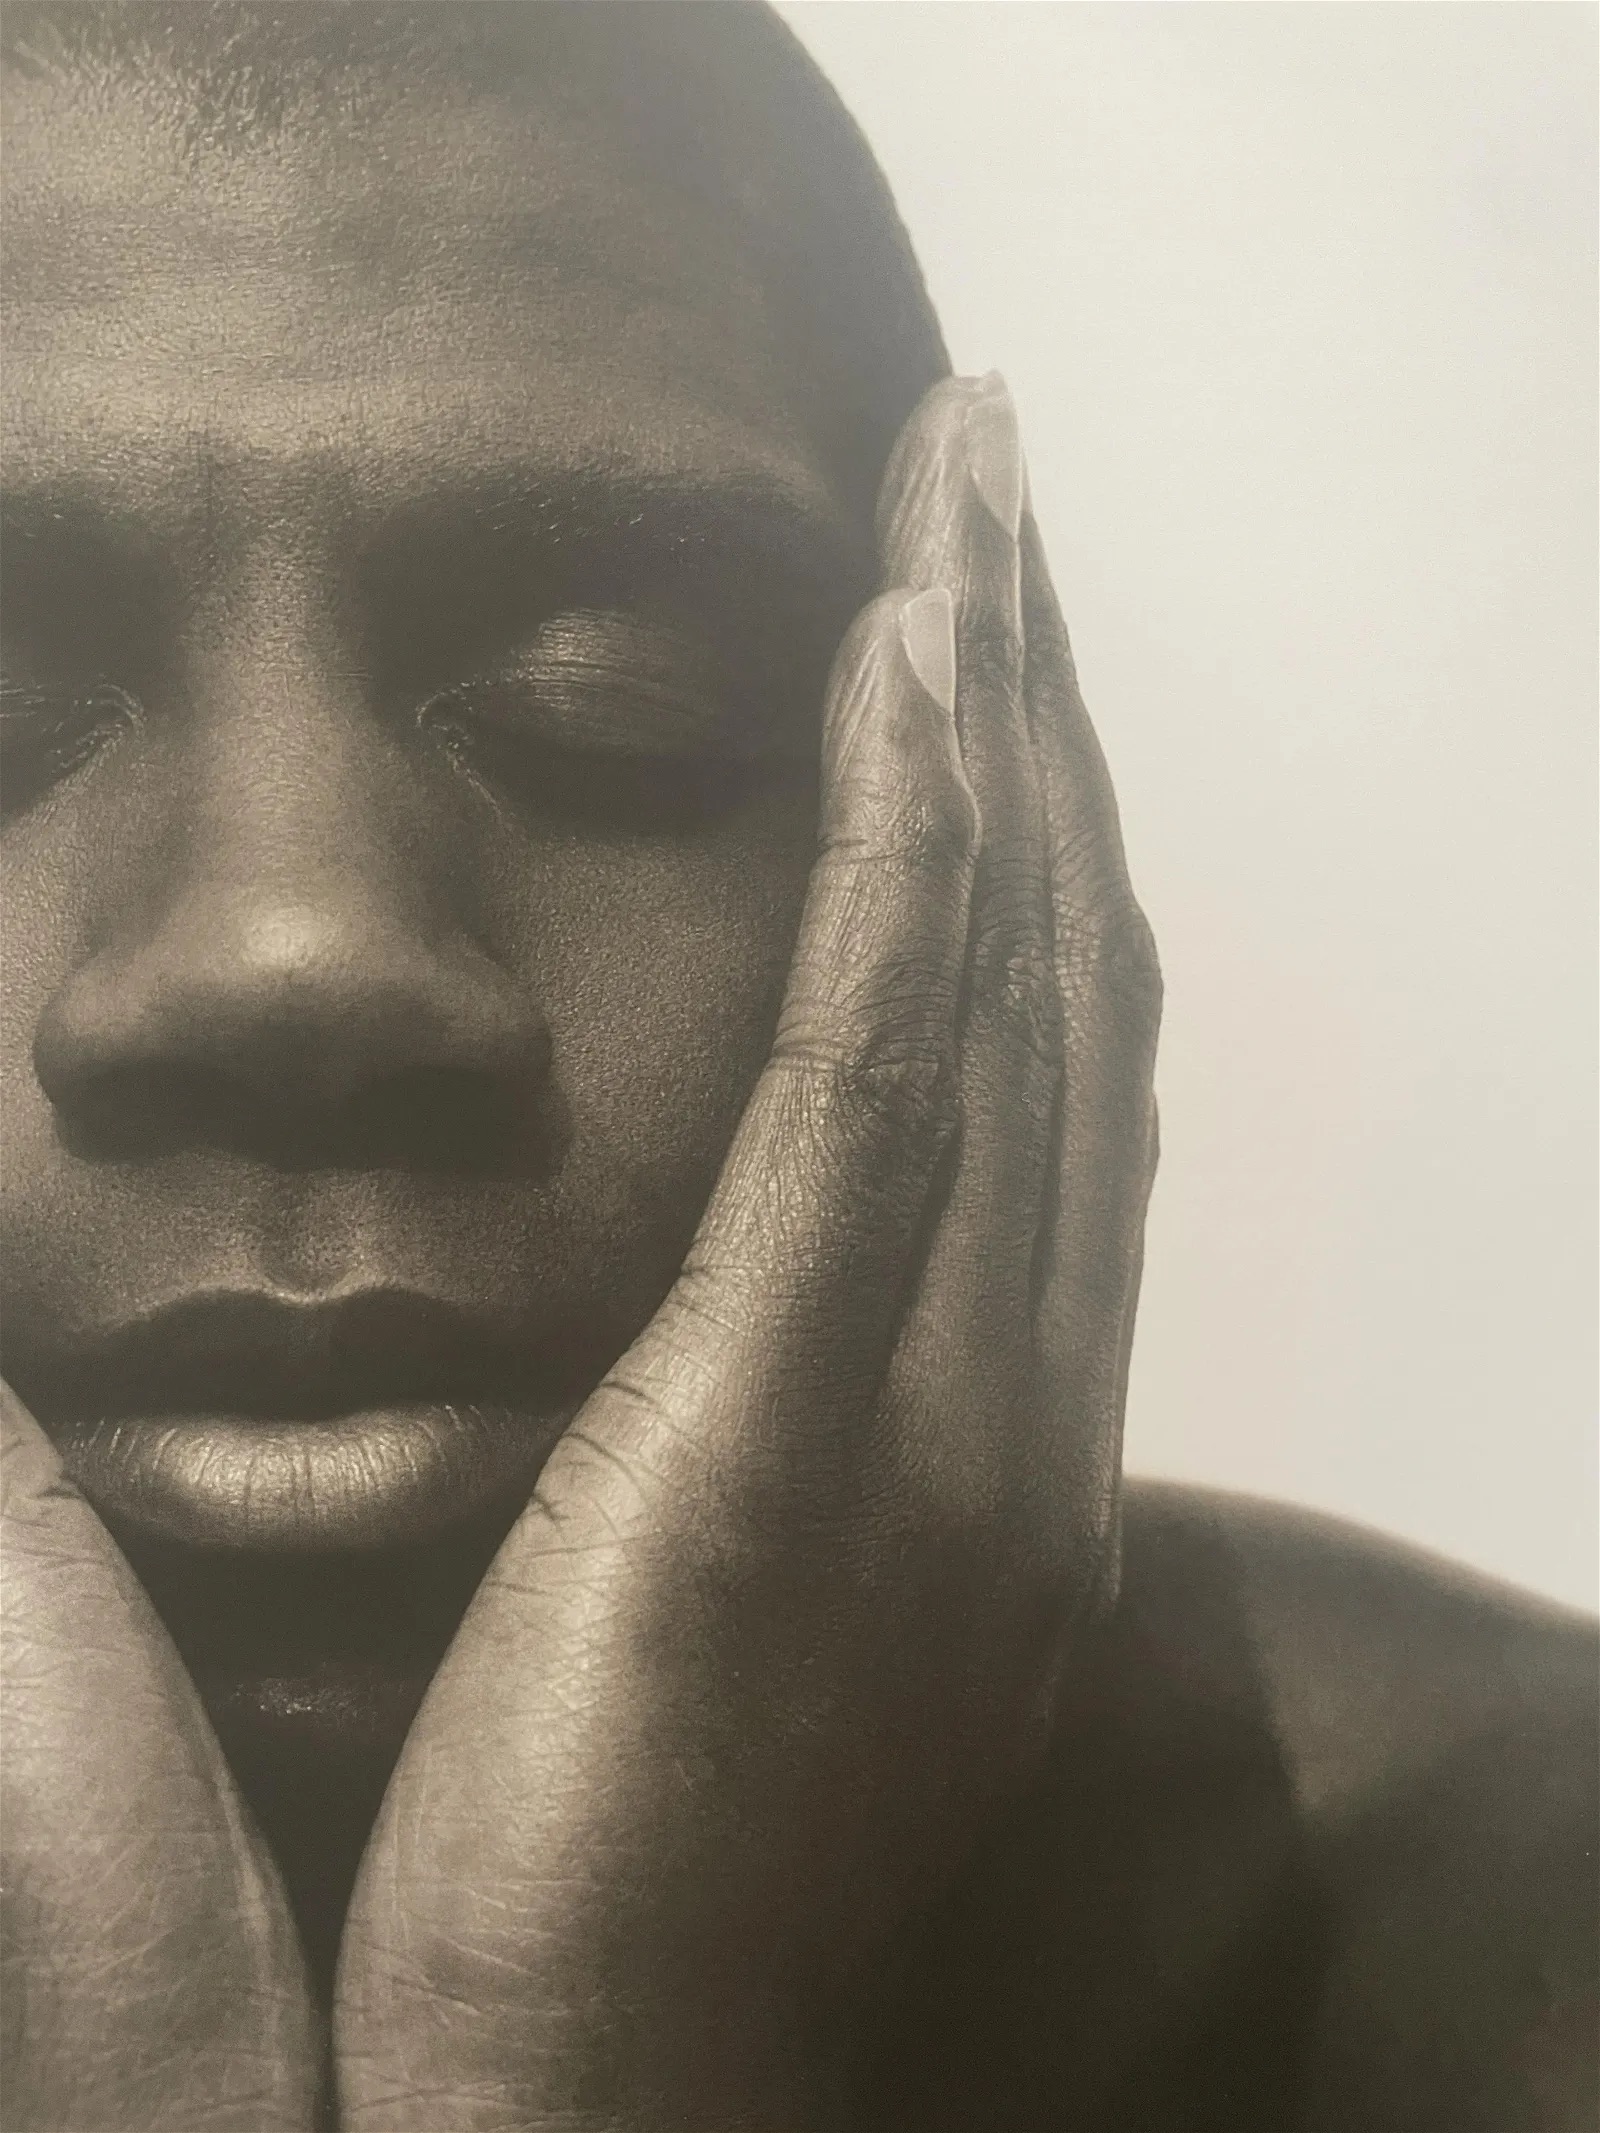 Herb Ritts "Earvin Magic Johnson, Hollywood" Print - Image 5 of 5